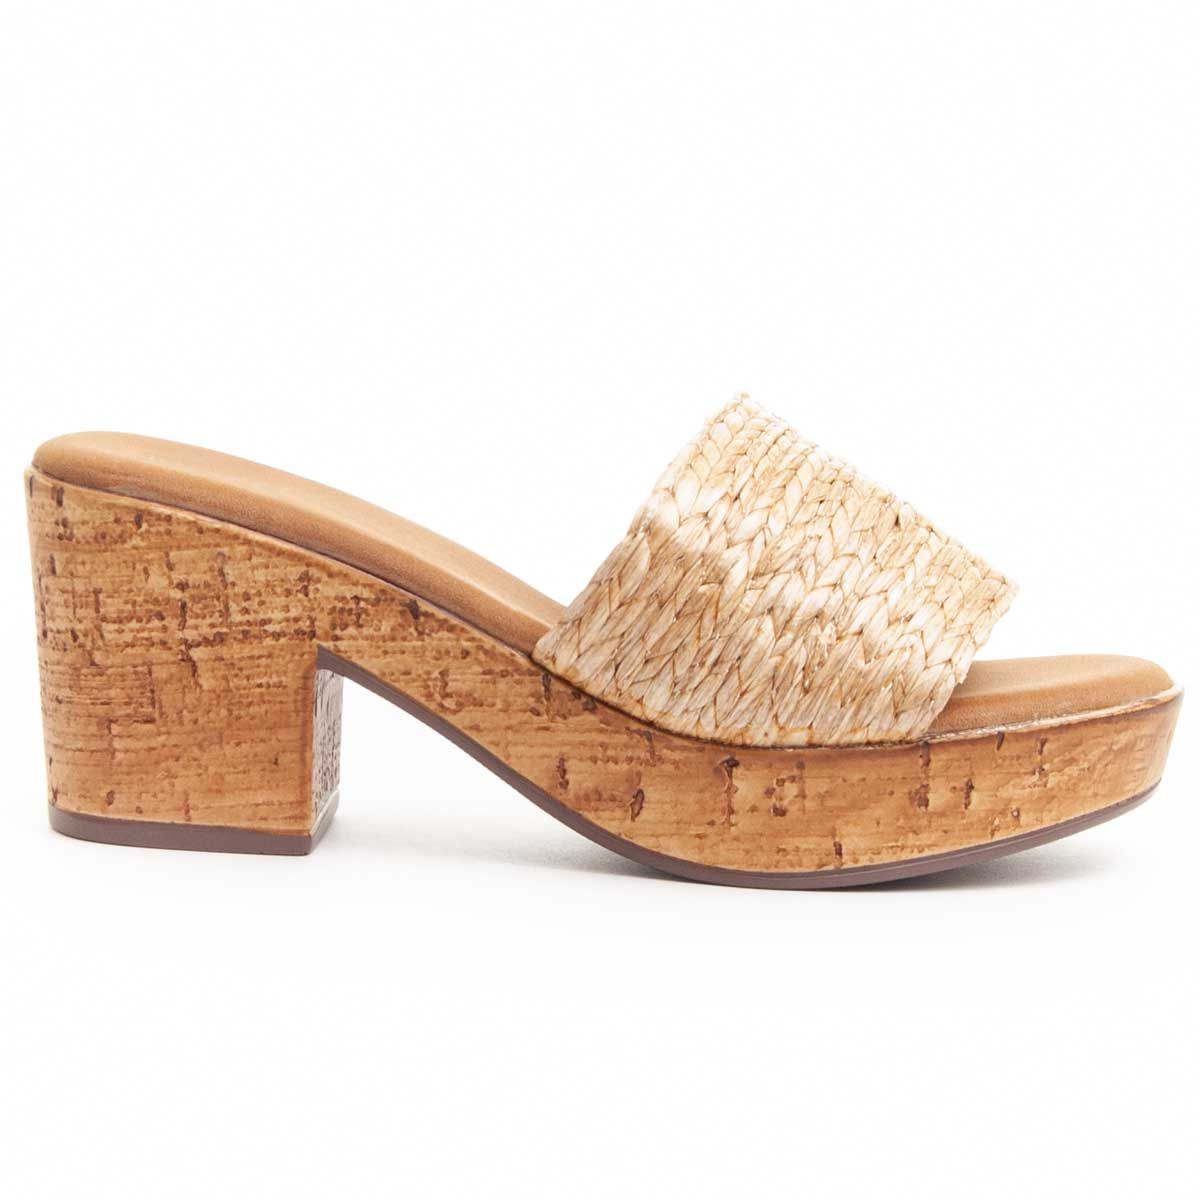 Sandal with comfortable platform and wide heel for women. Raffia lined that gives you a unique style. Quilted template that cushions your tread. Anti-slip sole and very light. The perfect sandal to go comfortable without losing style. Approximate measures: 8 cm Heel and 4 cm platform. Approximate measurement in centimeters of the inner plant: 35 / 23.4; 36/24; 37/24.6; 38/25; 39/25.6; 40/26,2; 41/26.8. Capsula by Festissimo collection.